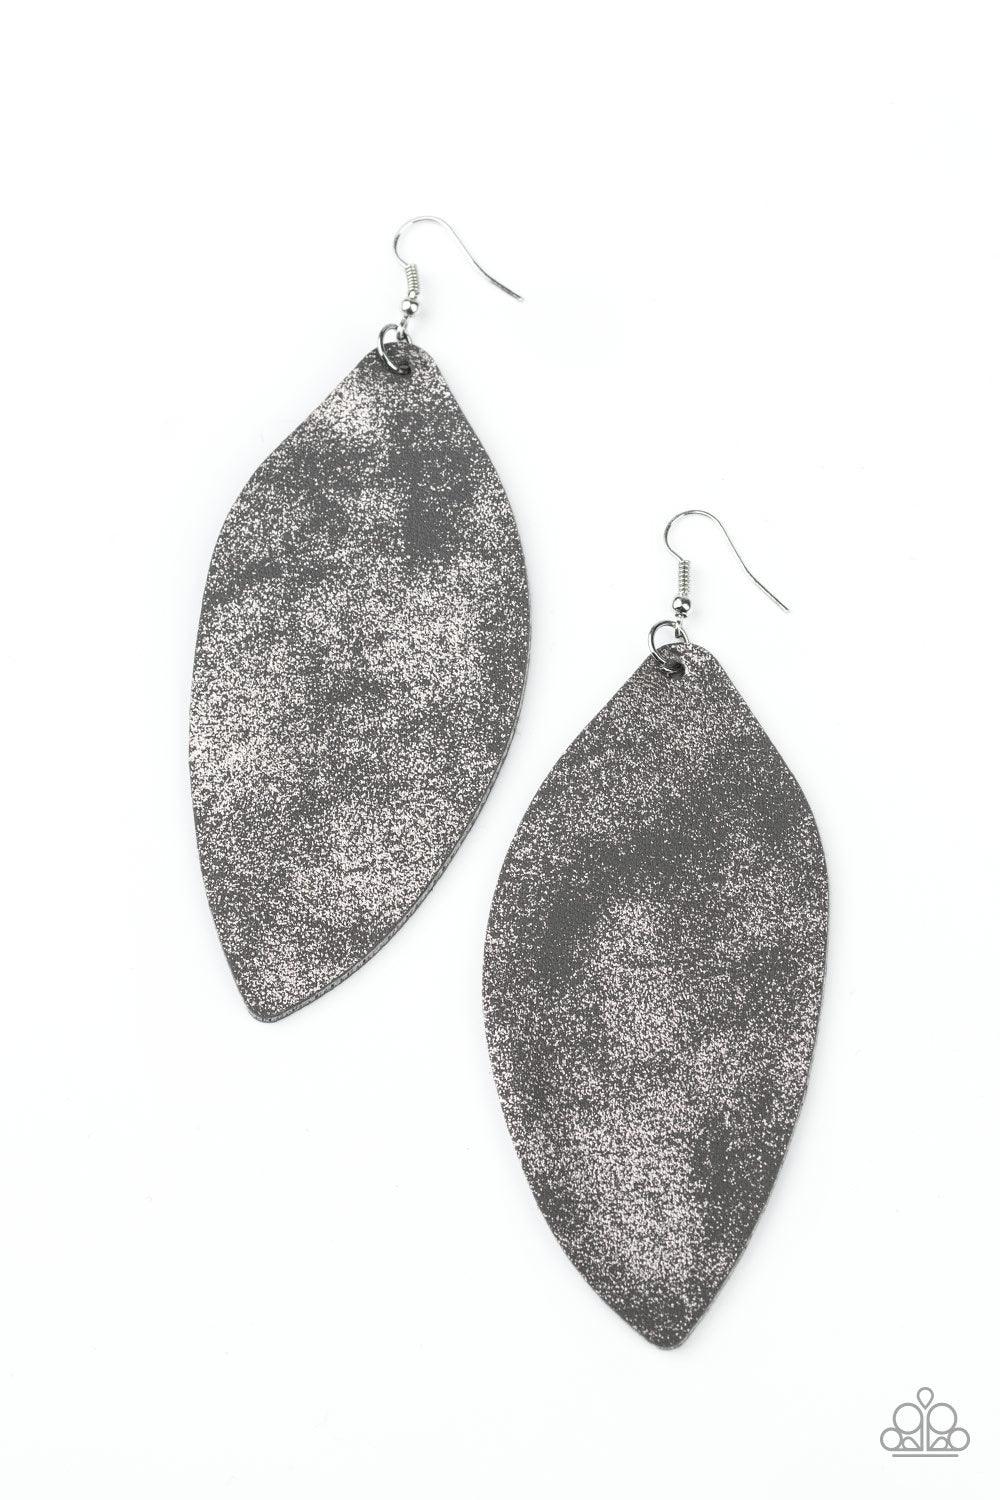 Paparazzi Accessories Serenely Smattered - Silver Dusted in a silver shimmer, an asymmetrical piece of gray leather swings from the ear in a statement-making fashion. Earring attaches to a standard fishhook fitting. Jewelry